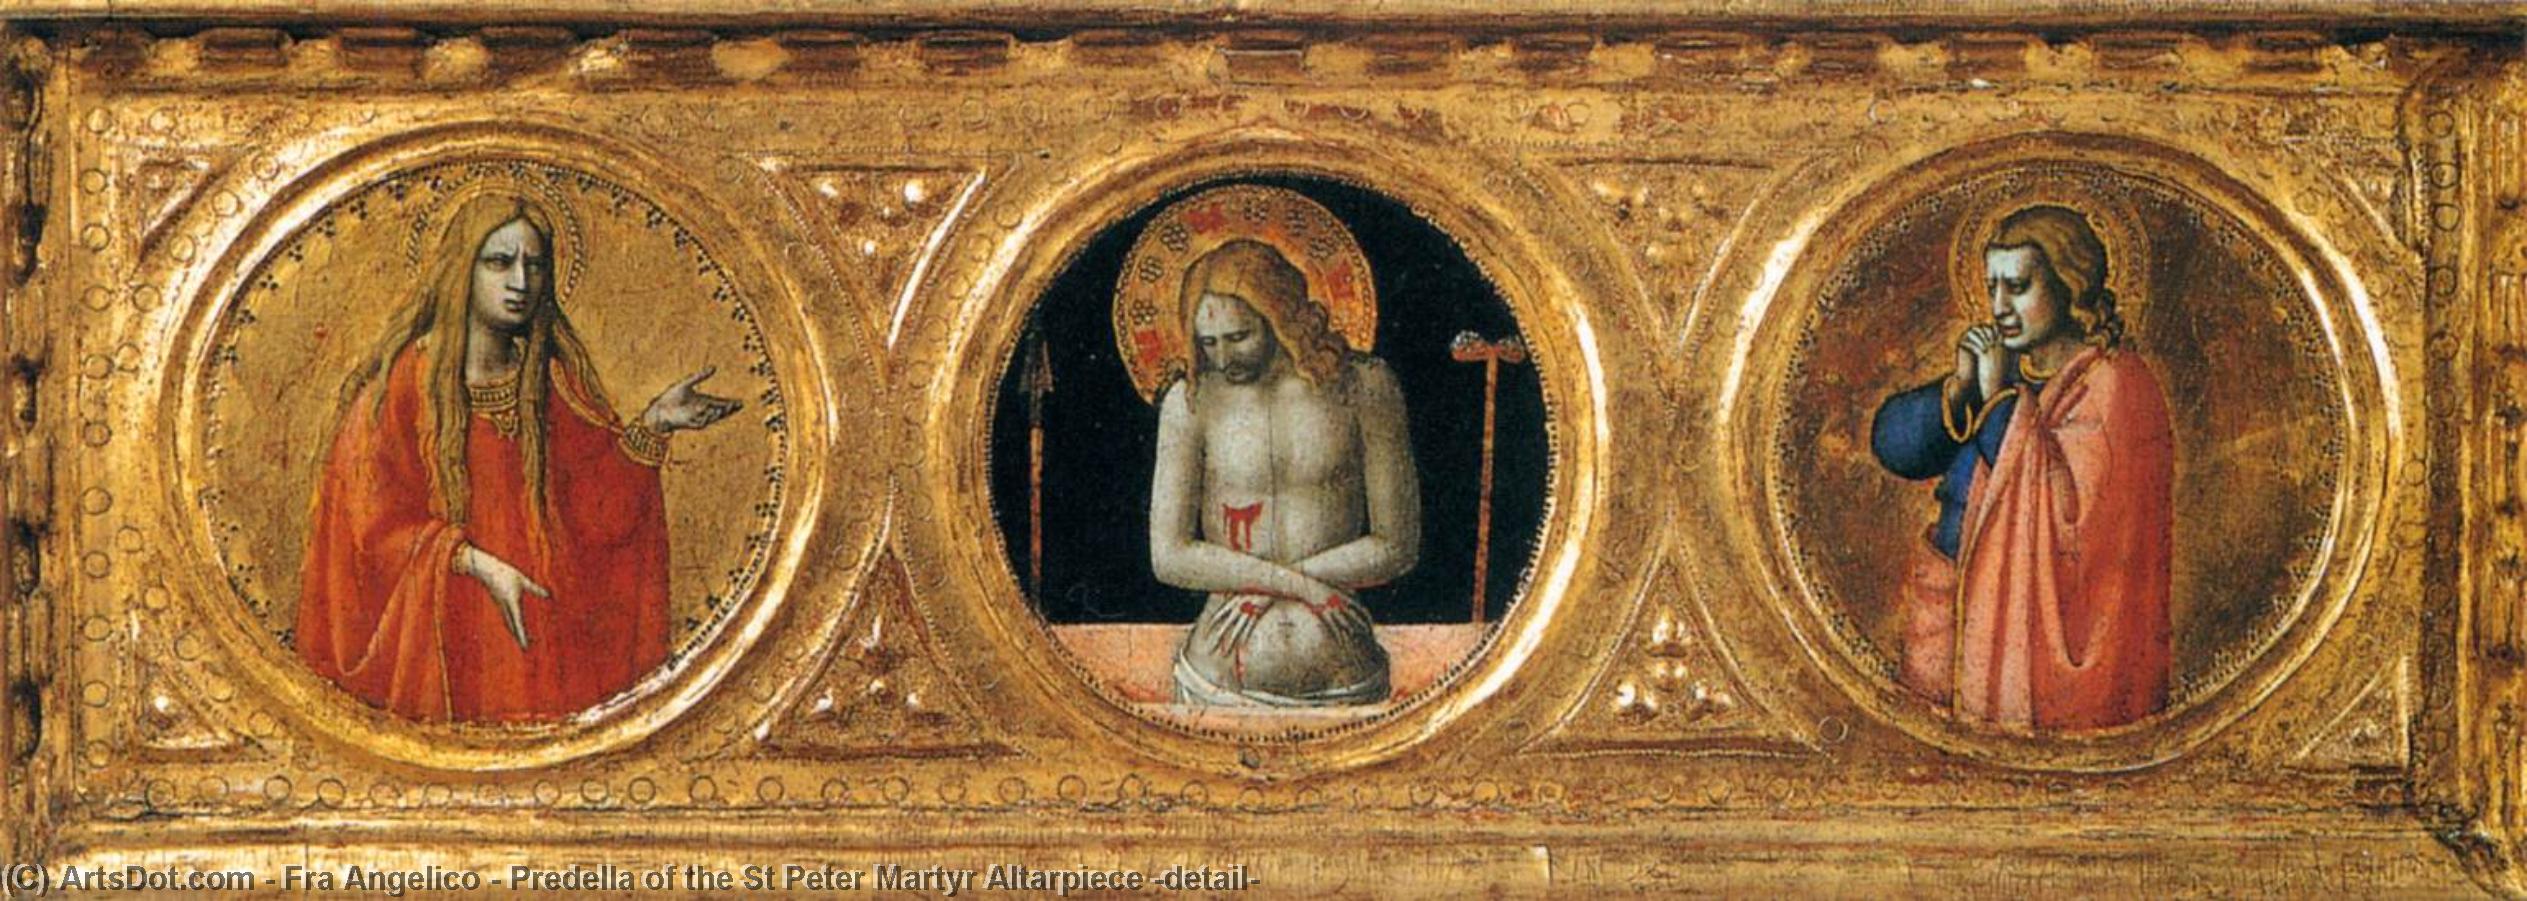 Wikioo.org - สารานุกรมวิจิตรศิลป์ - จิตรกรรม Fra Angelico - Predella of the St Peter Martyr Altarpiece (detail)